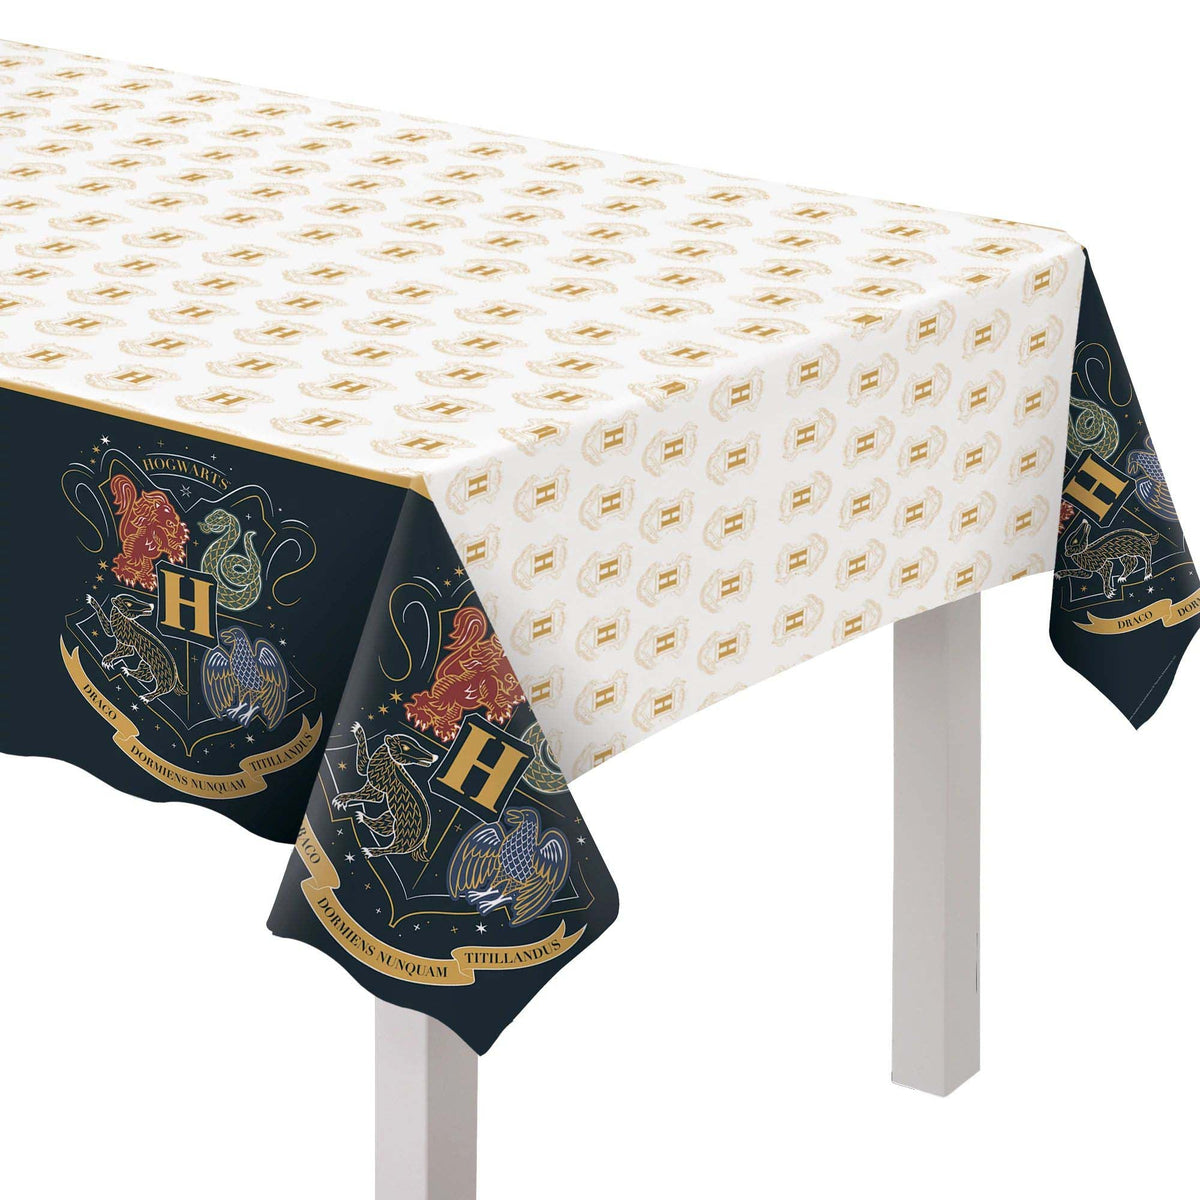 AMSCAN CA Kids Birthday Harry Potter Rectangular Plastic Table Cover, 1 Count